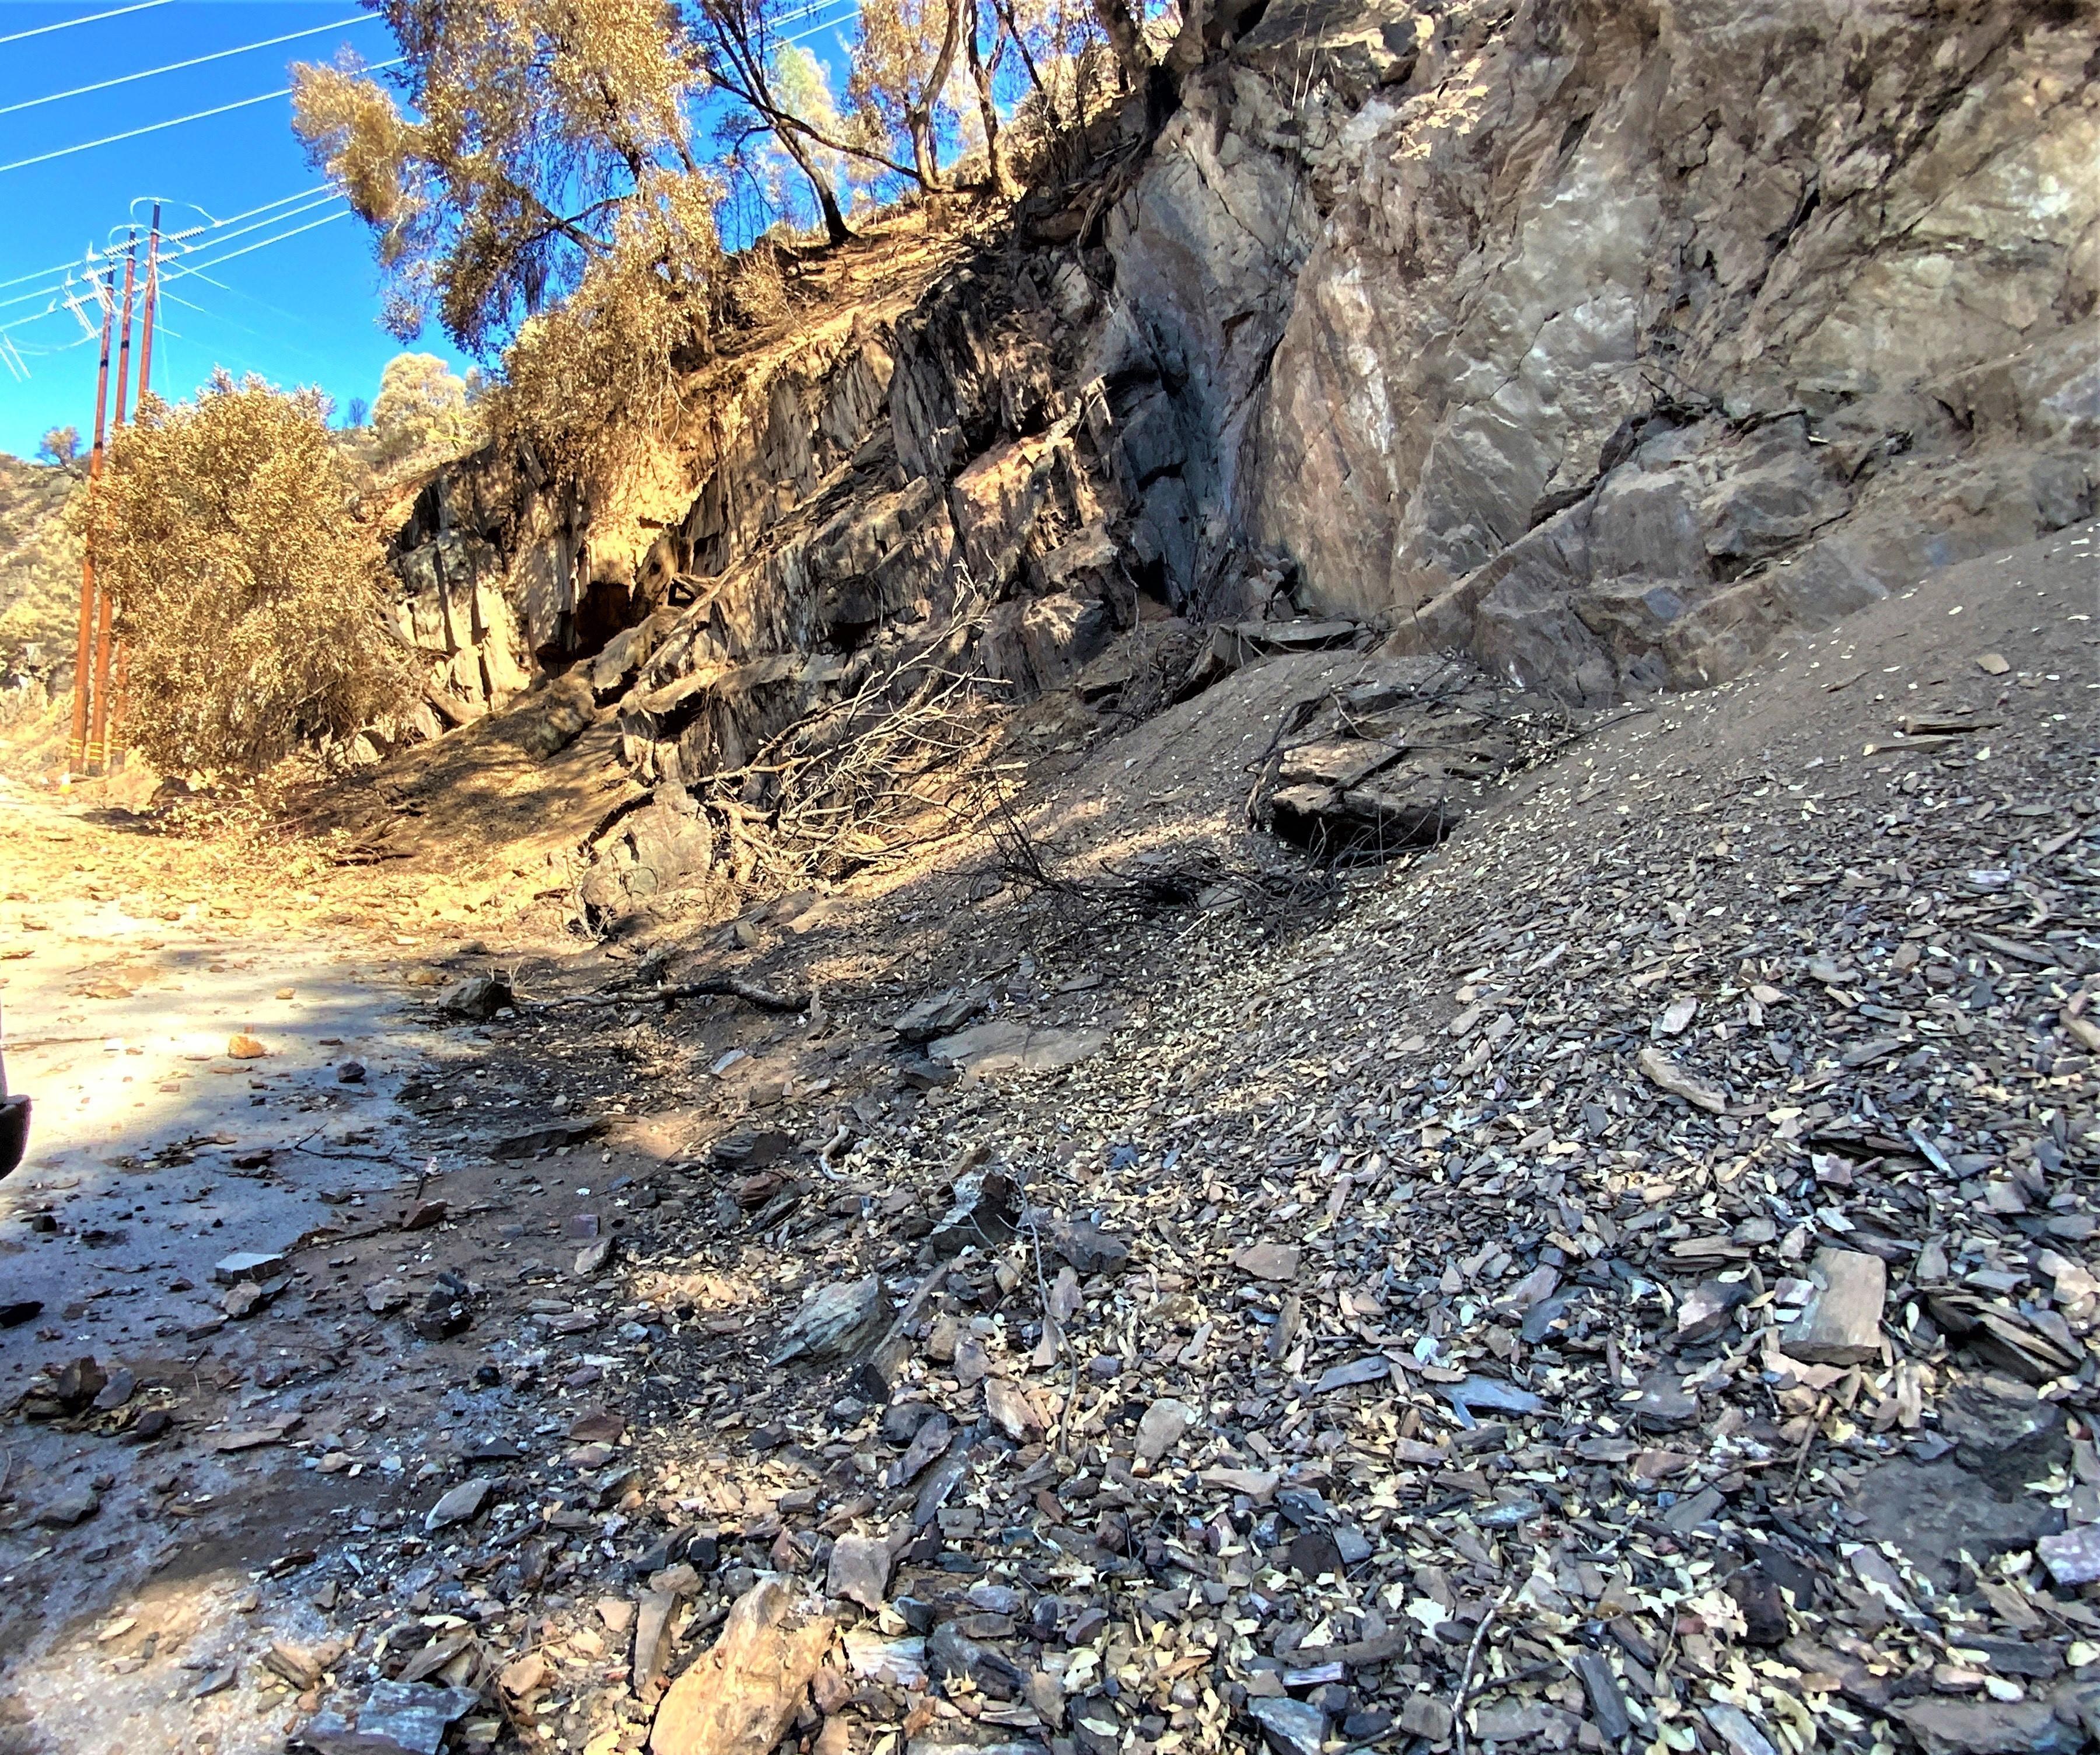 Image showing Rocks and other debris hazards along road in Mosquito burned area